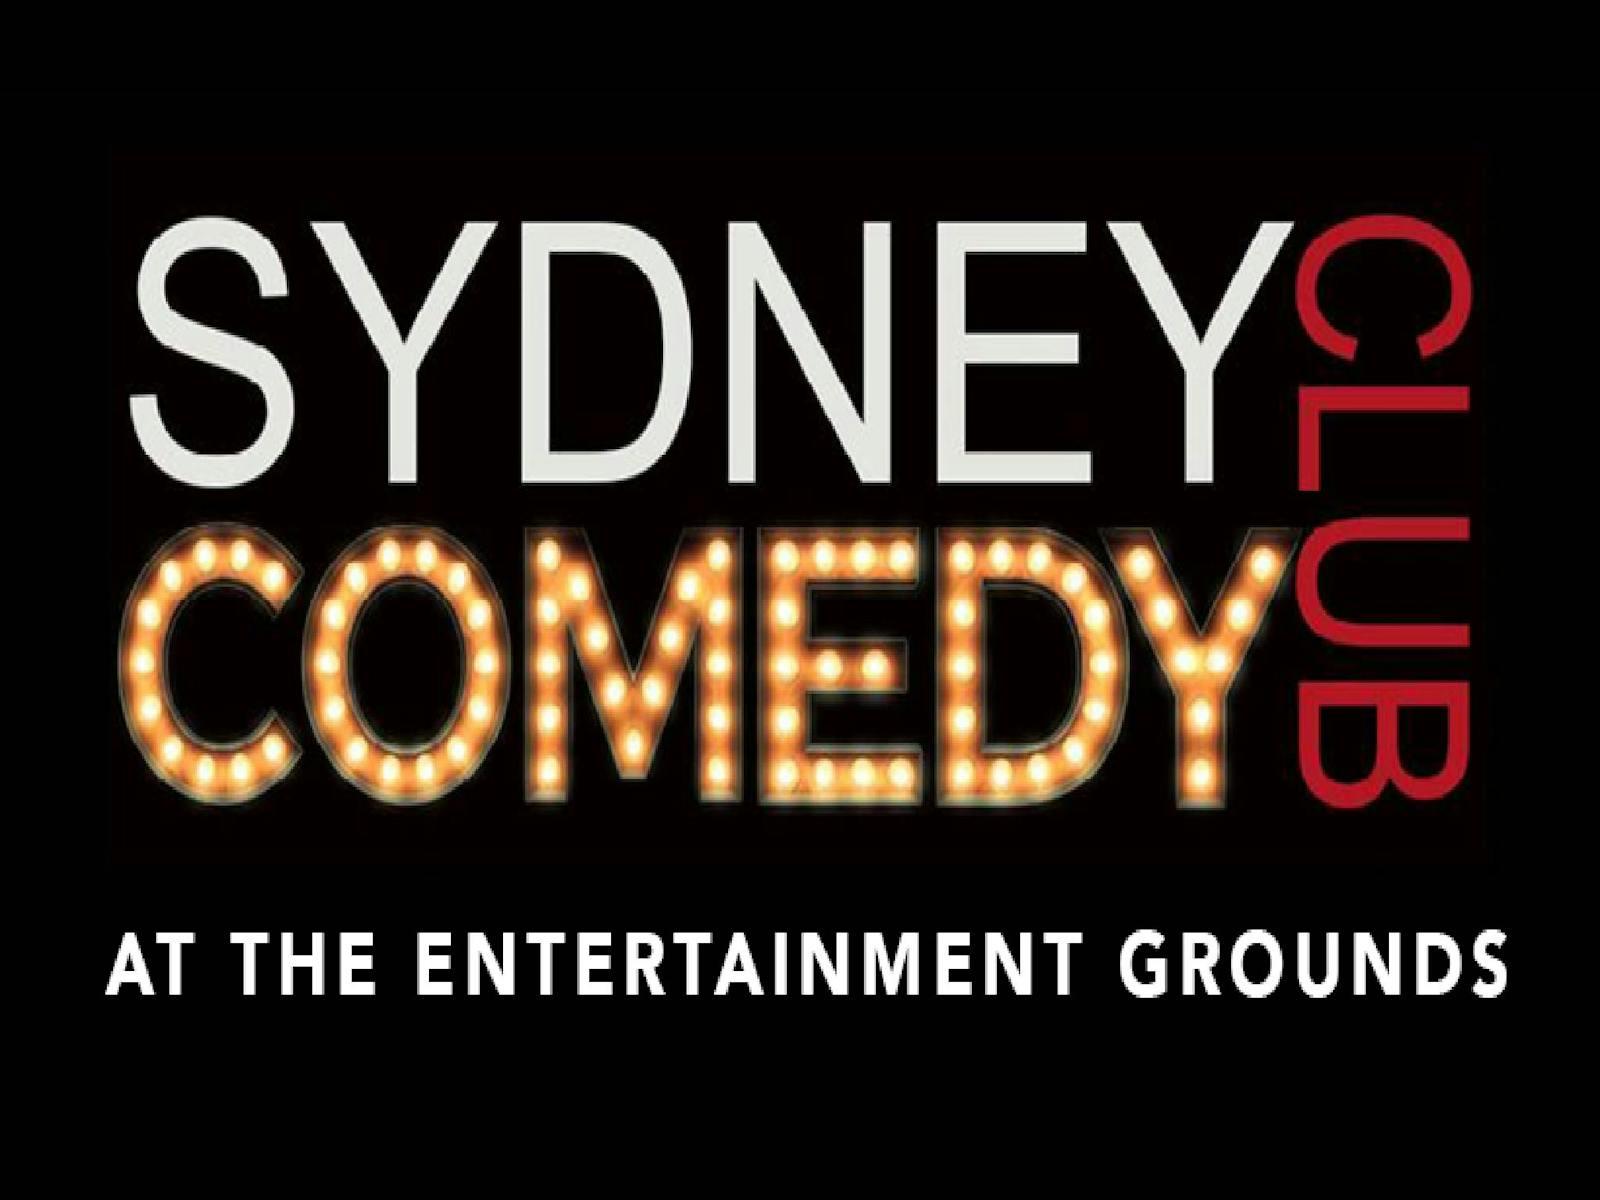 Image for The Sydney Comedy Club Entertainment Grounds November